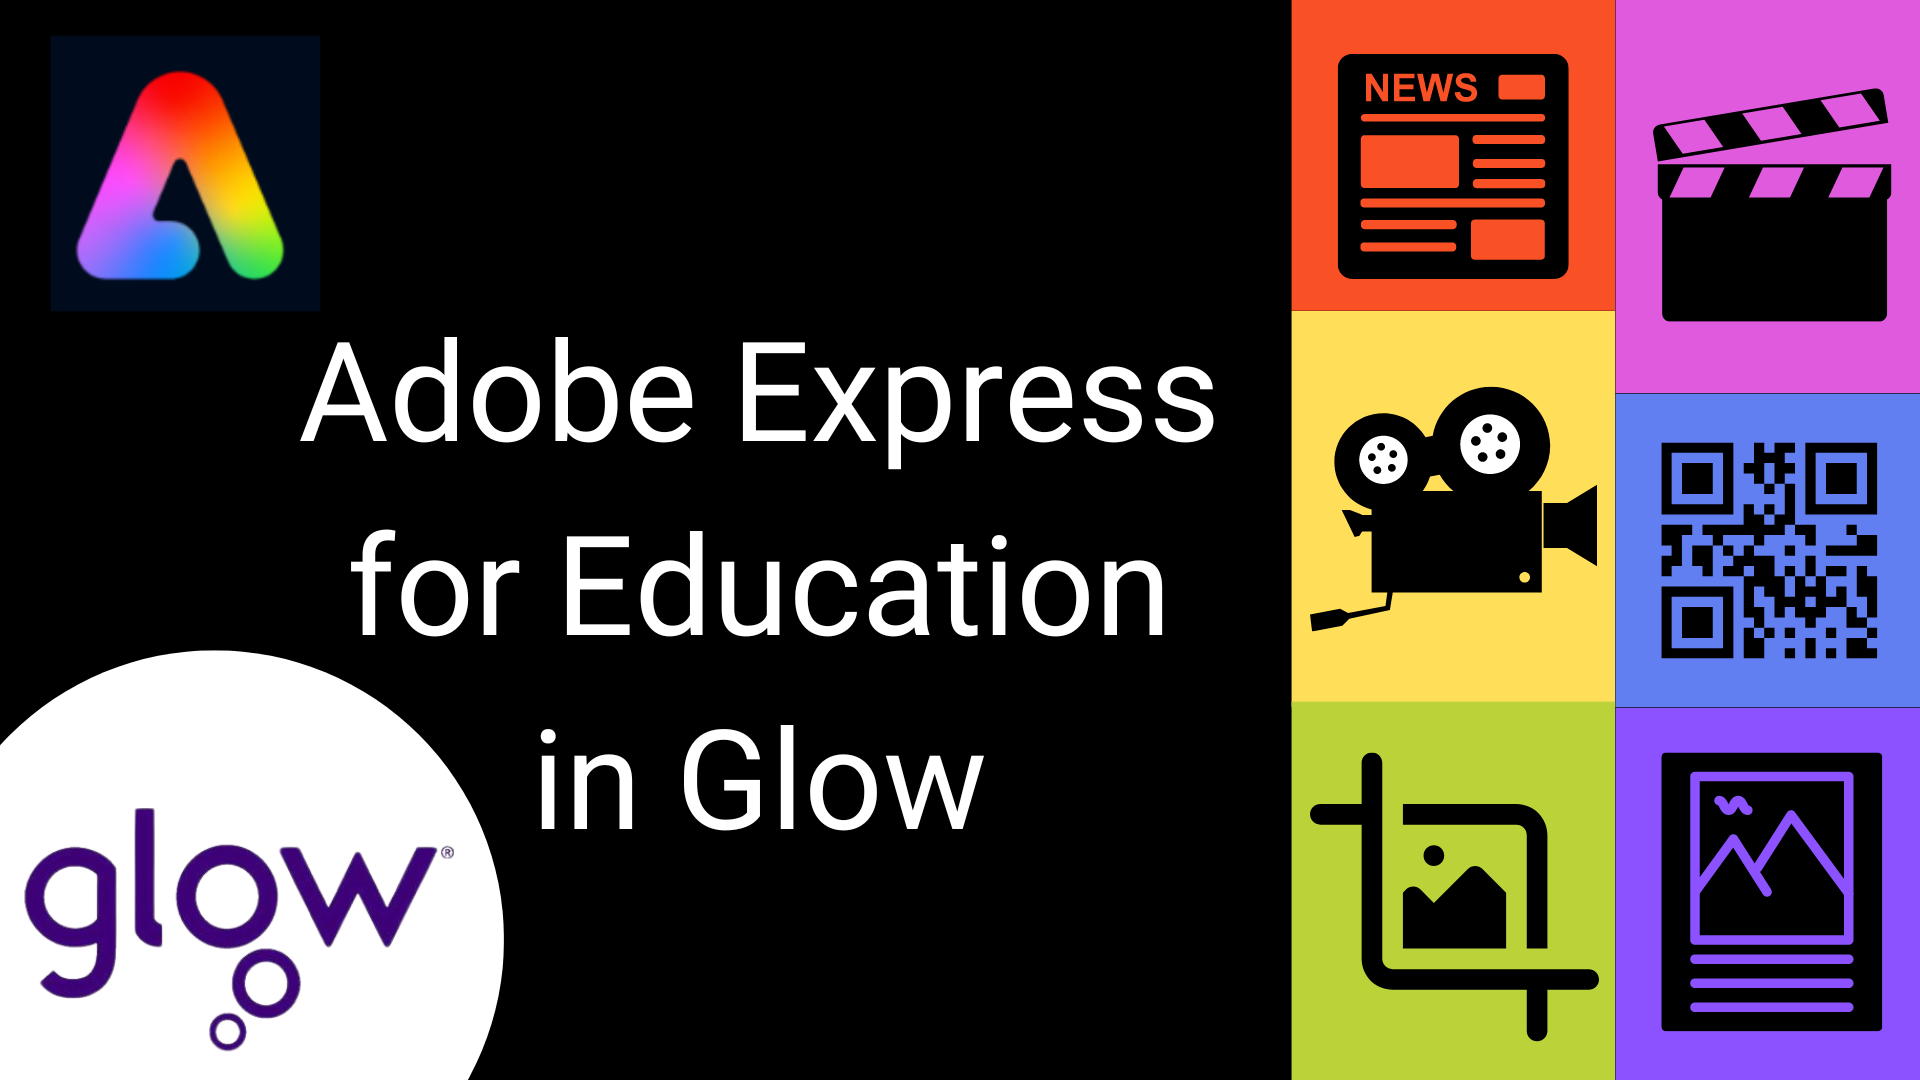 Adobe Express for Education in glow graphic